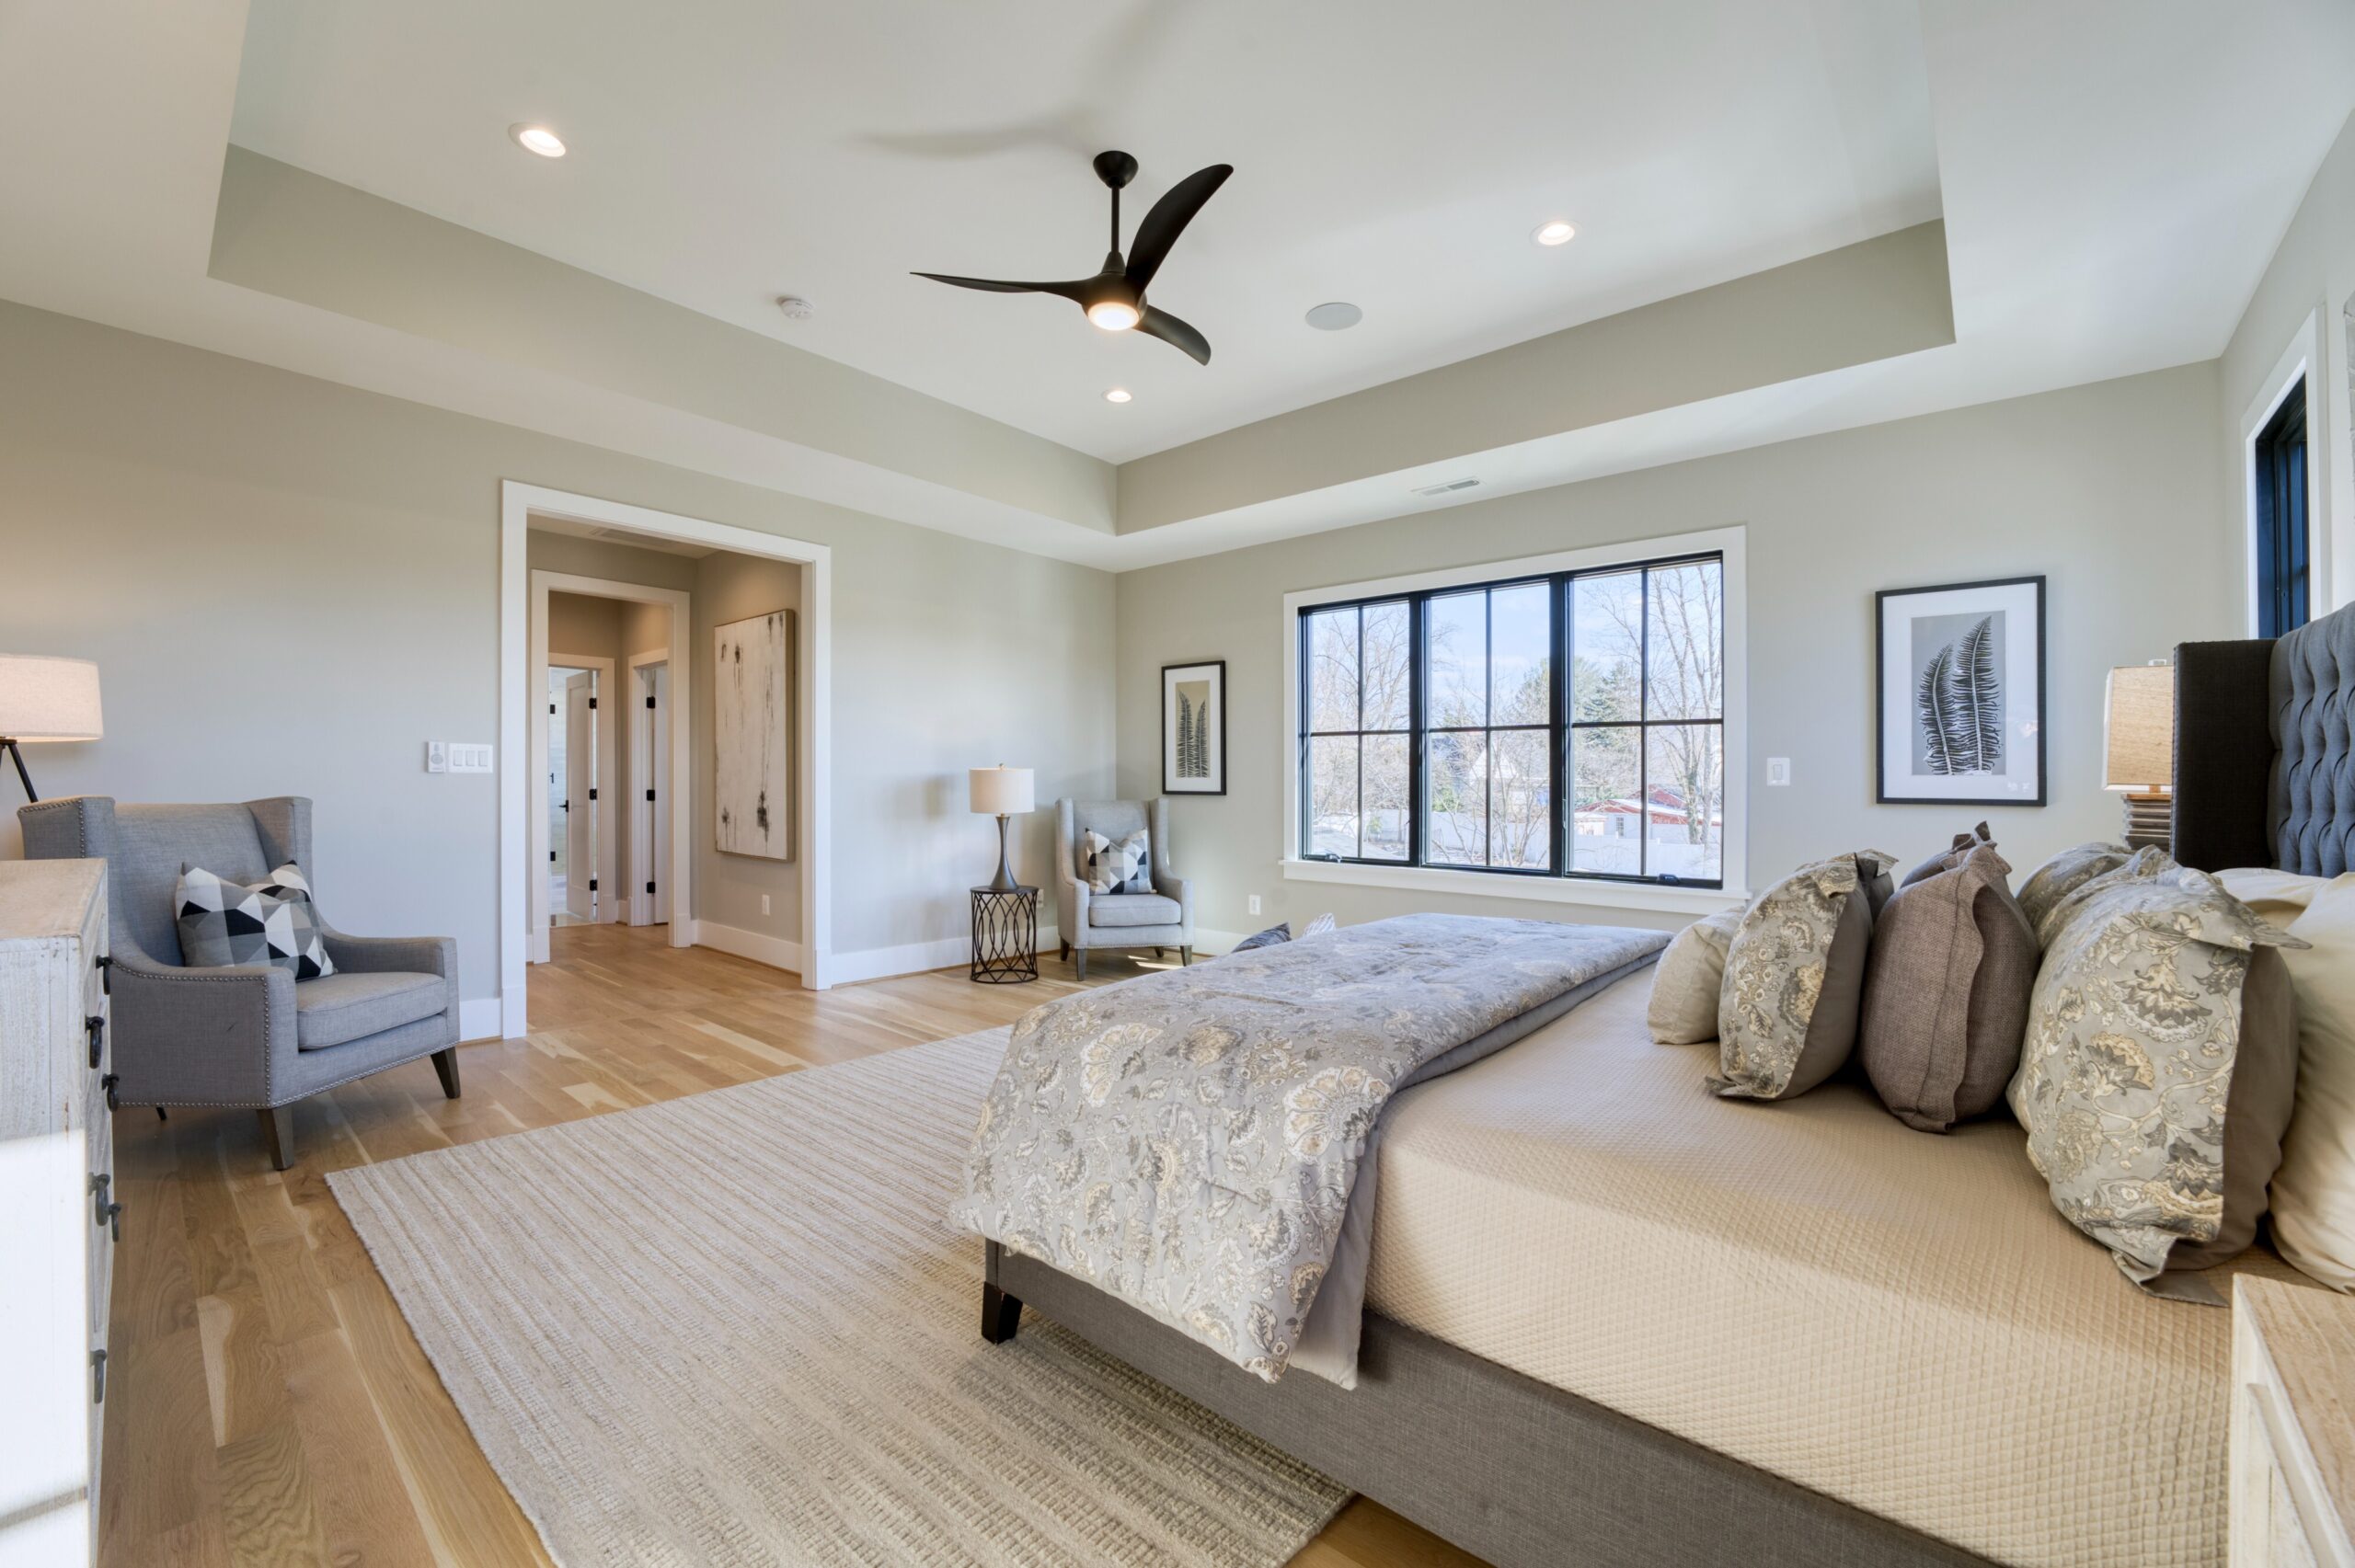 Professional interior photo of 1624 Dempsey St, McLean, VA - showing the primary bedroom with deep trey ceiling, hardwood floors and connection to adjoining bathroom